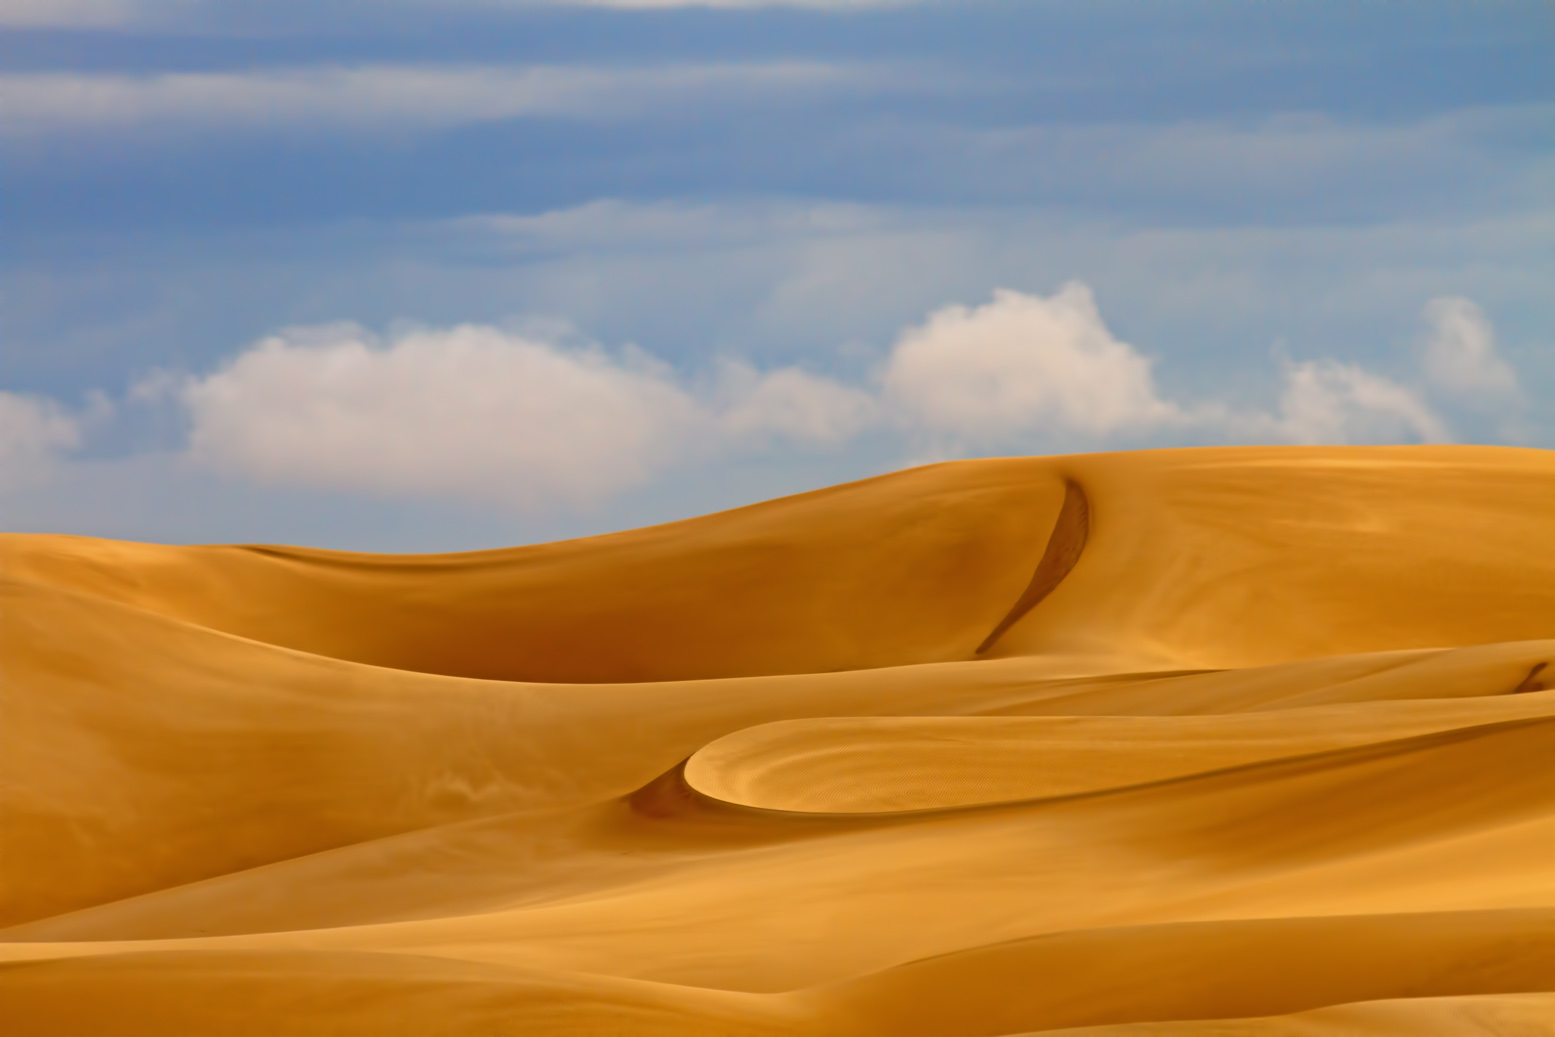 Imperial Sand Dunes, a photograph by Norma Woodward (MG: November 2013)